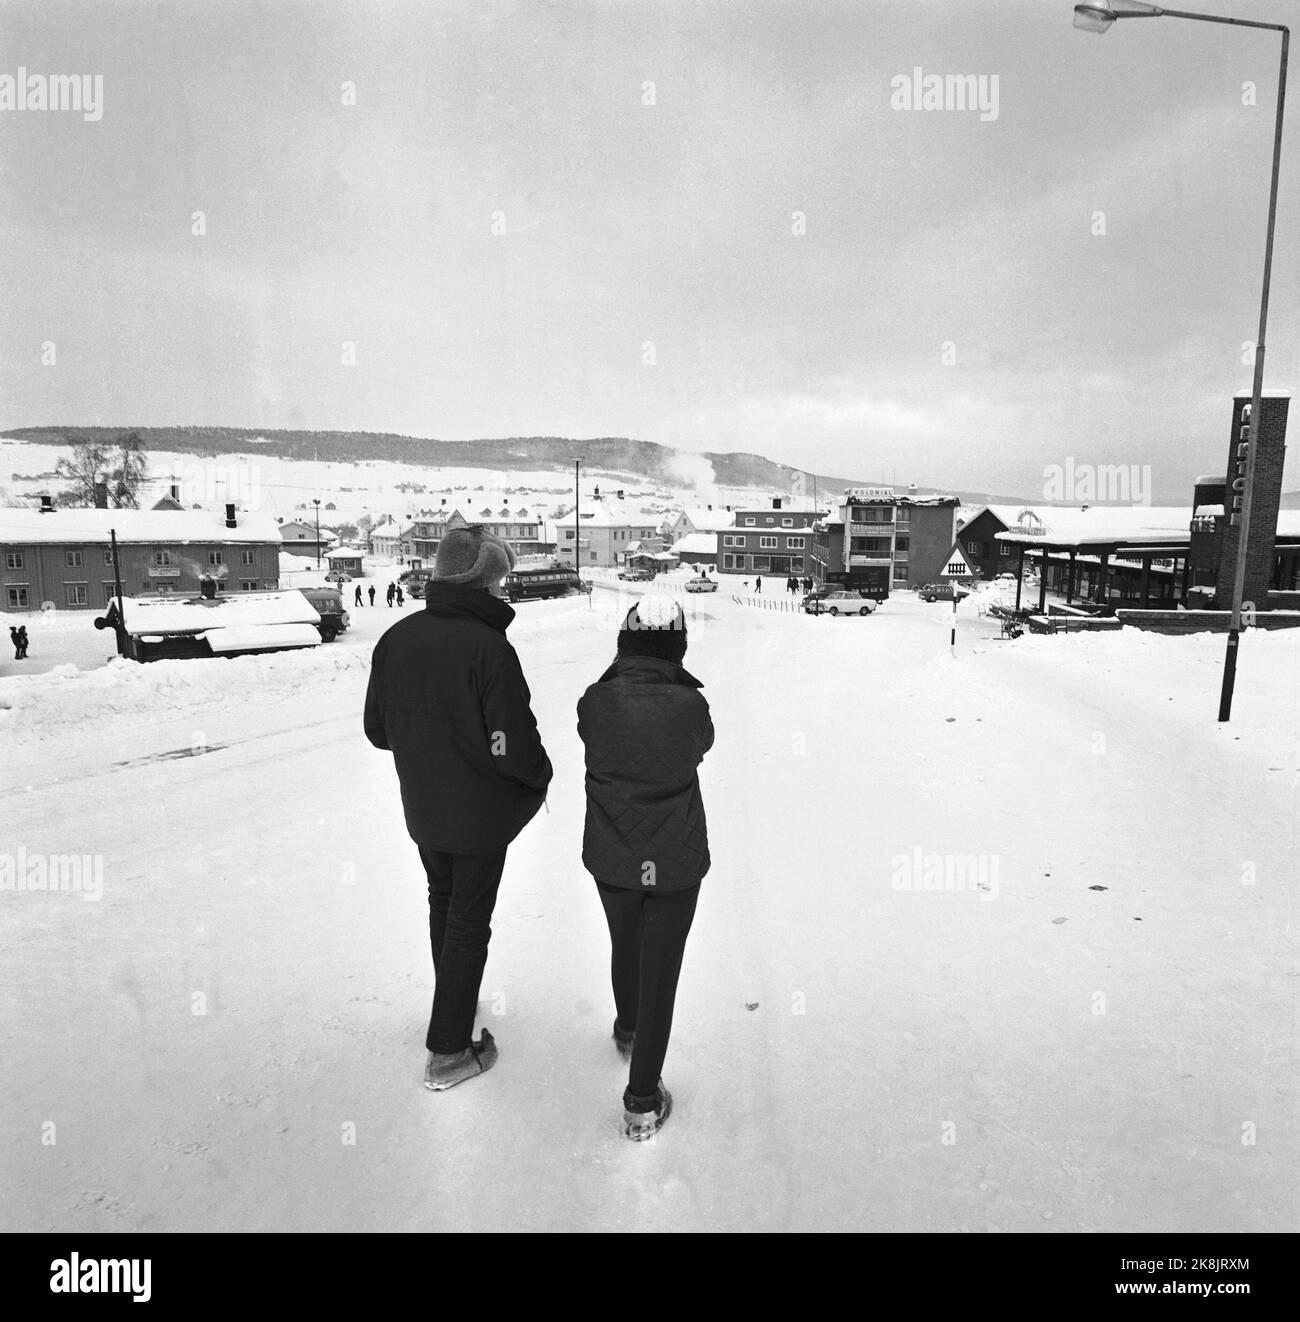 Tynset 11 February 1967, Report on Norway's coldest village, Tynset. Here a couple on a trip in the cold. Photo: Aage Storløkken / Current / NTB Stock Photo